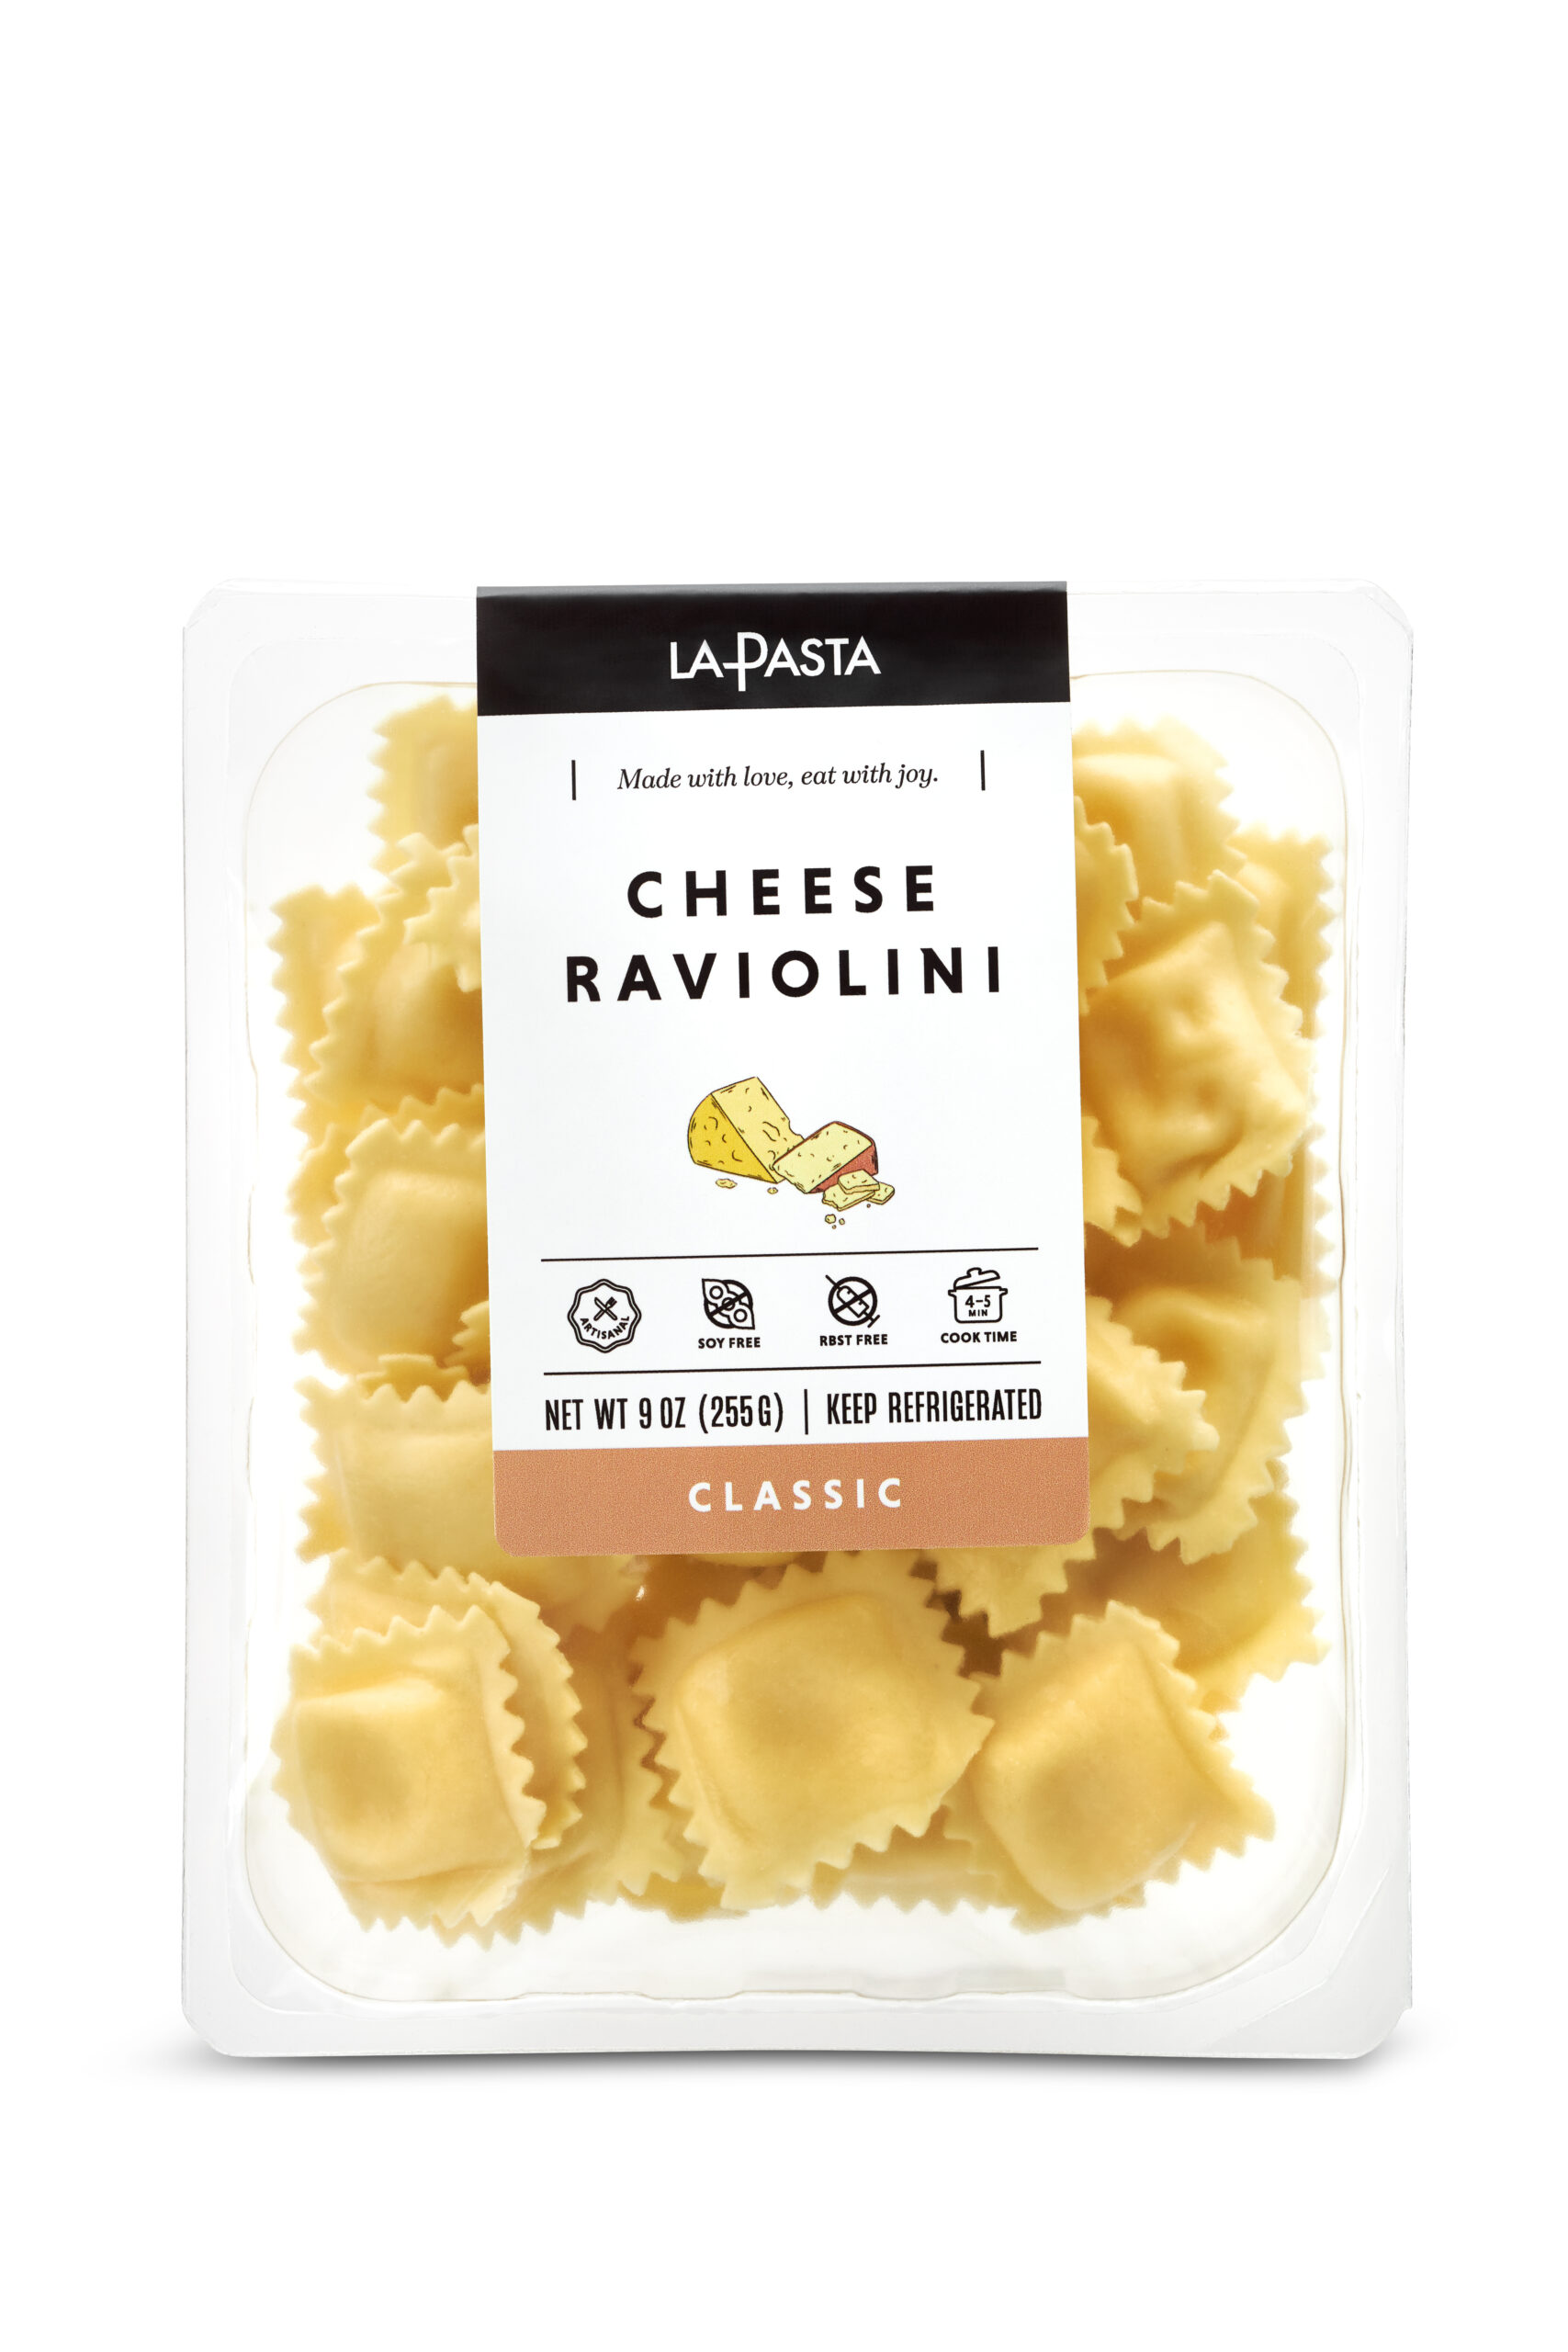 A package of cheese ravioli is shown.